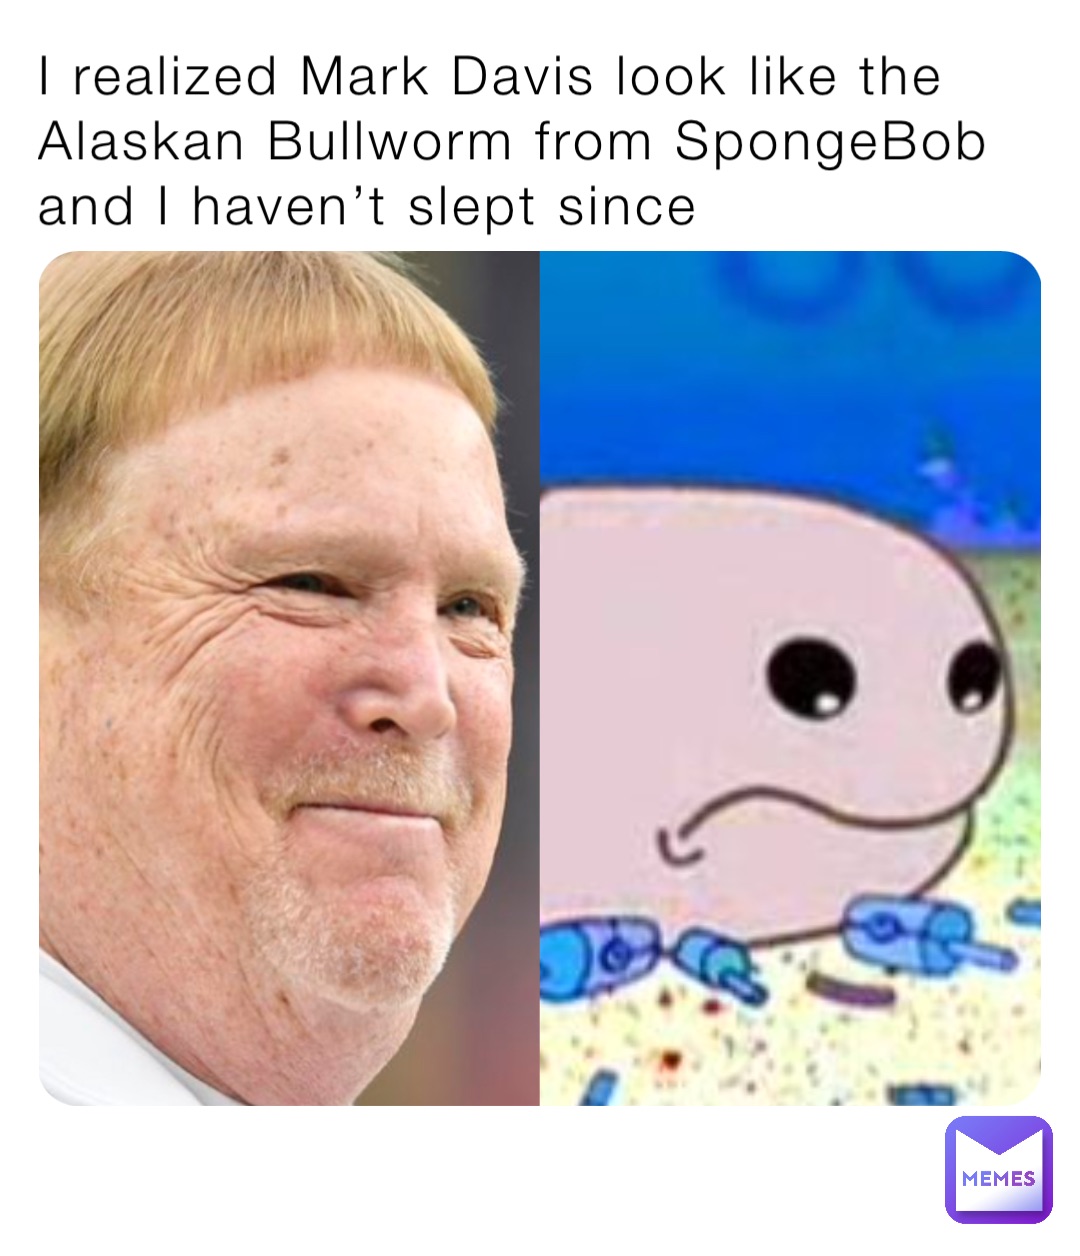 I realized Mark Davis look like the Alaskan Bullworm from SpongeBob and I haven’t slept since